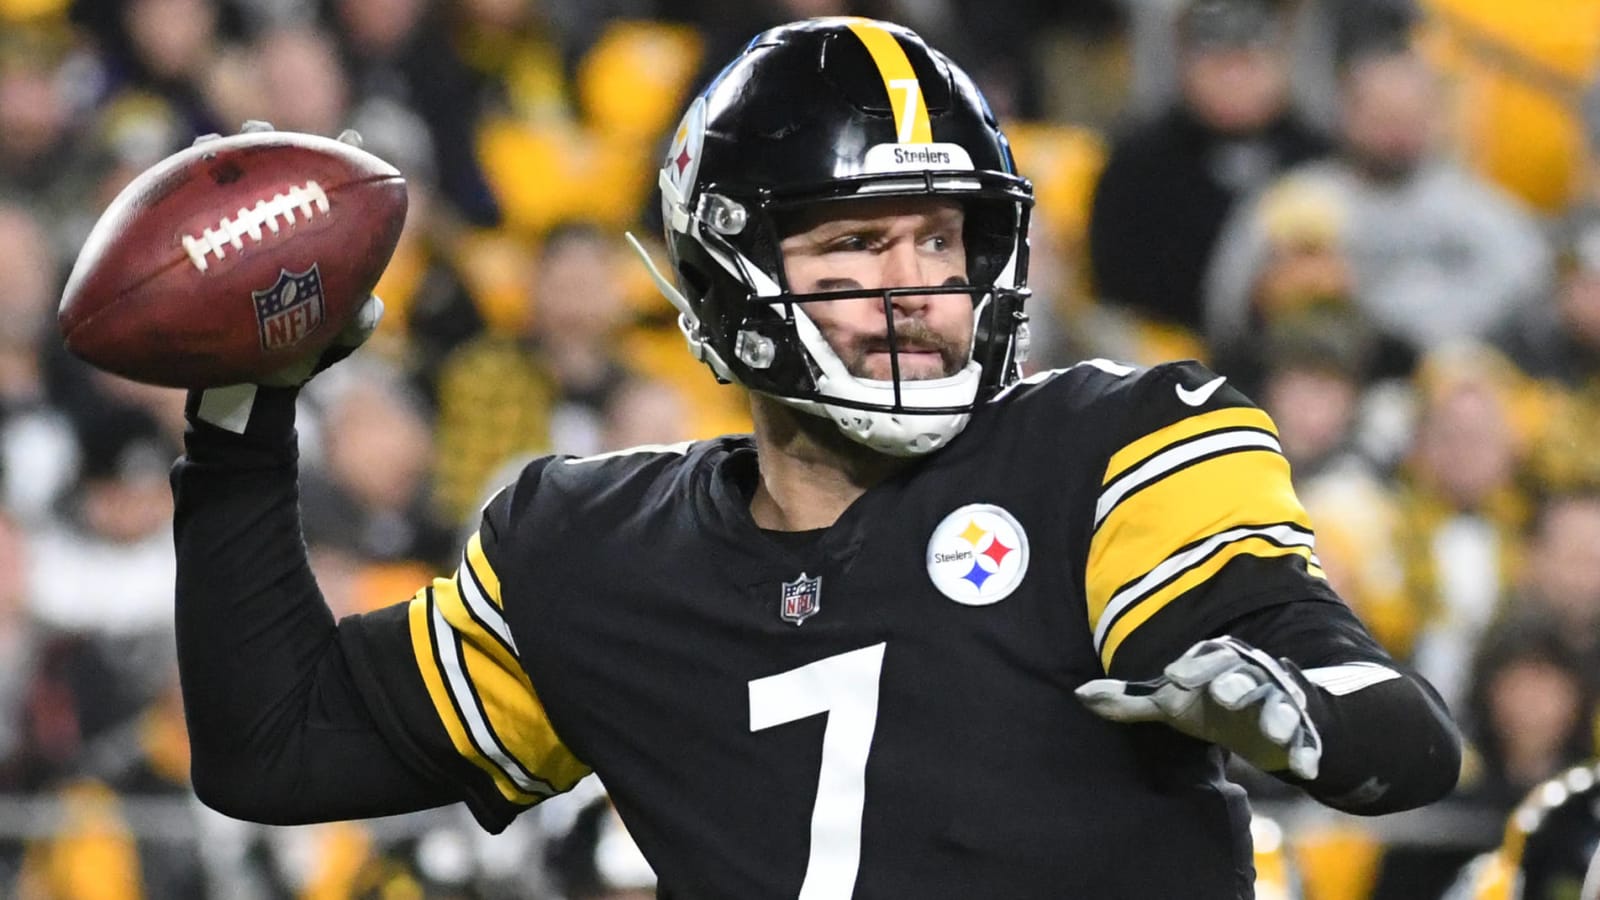 Ben Roethlisberger discusses difficulty of playing in 'Thursday Night Football'